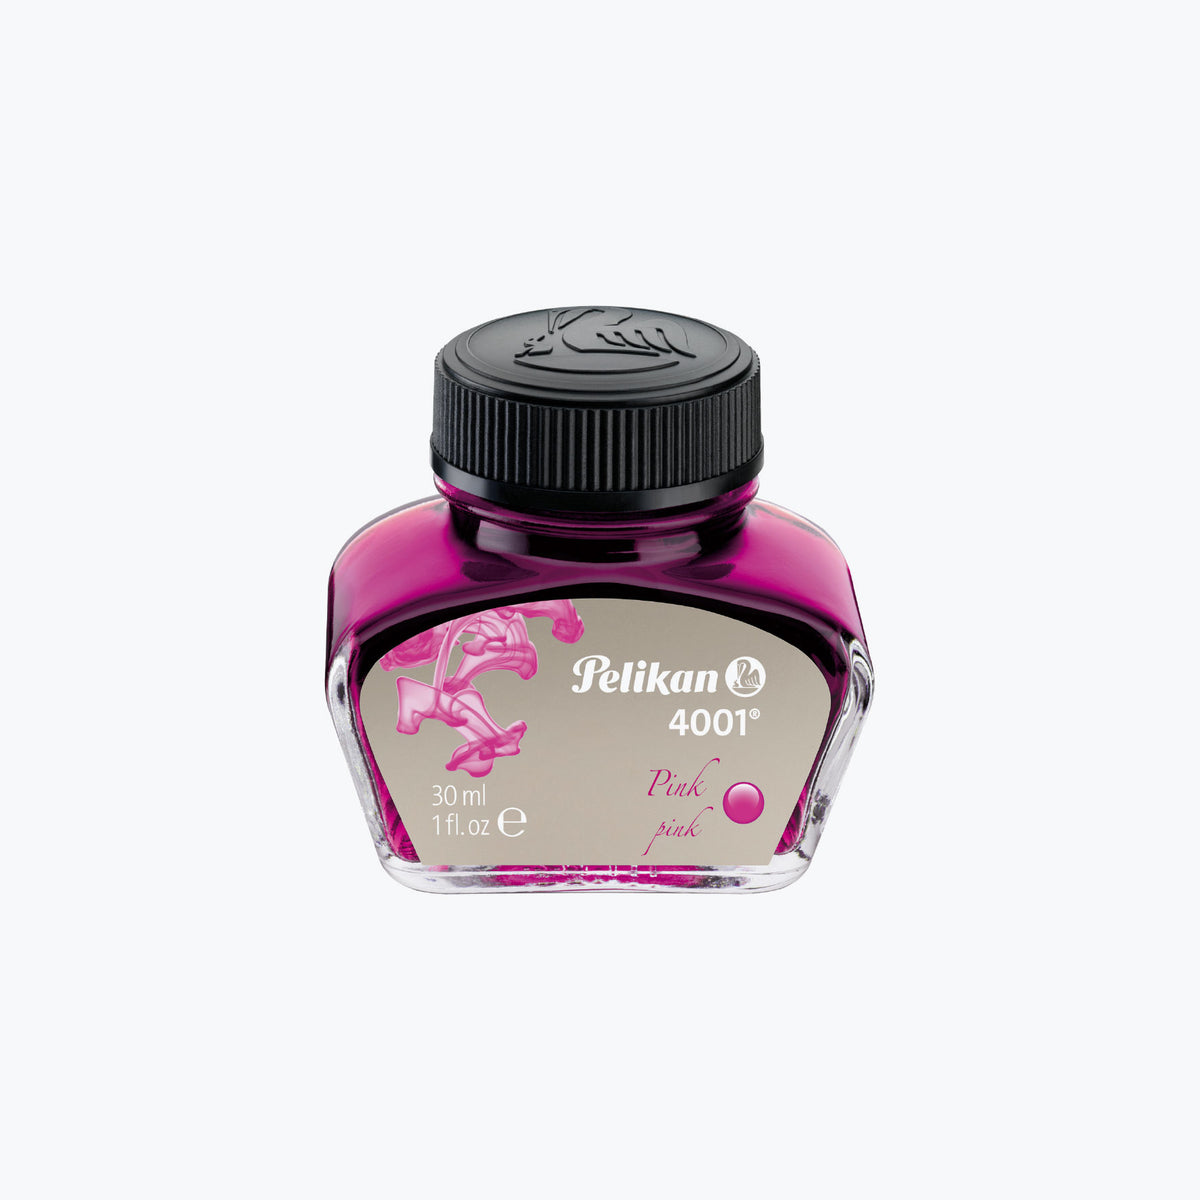 Pelikan - 4001 Ink (30ml) - Brilliant Pink <Outgoing>